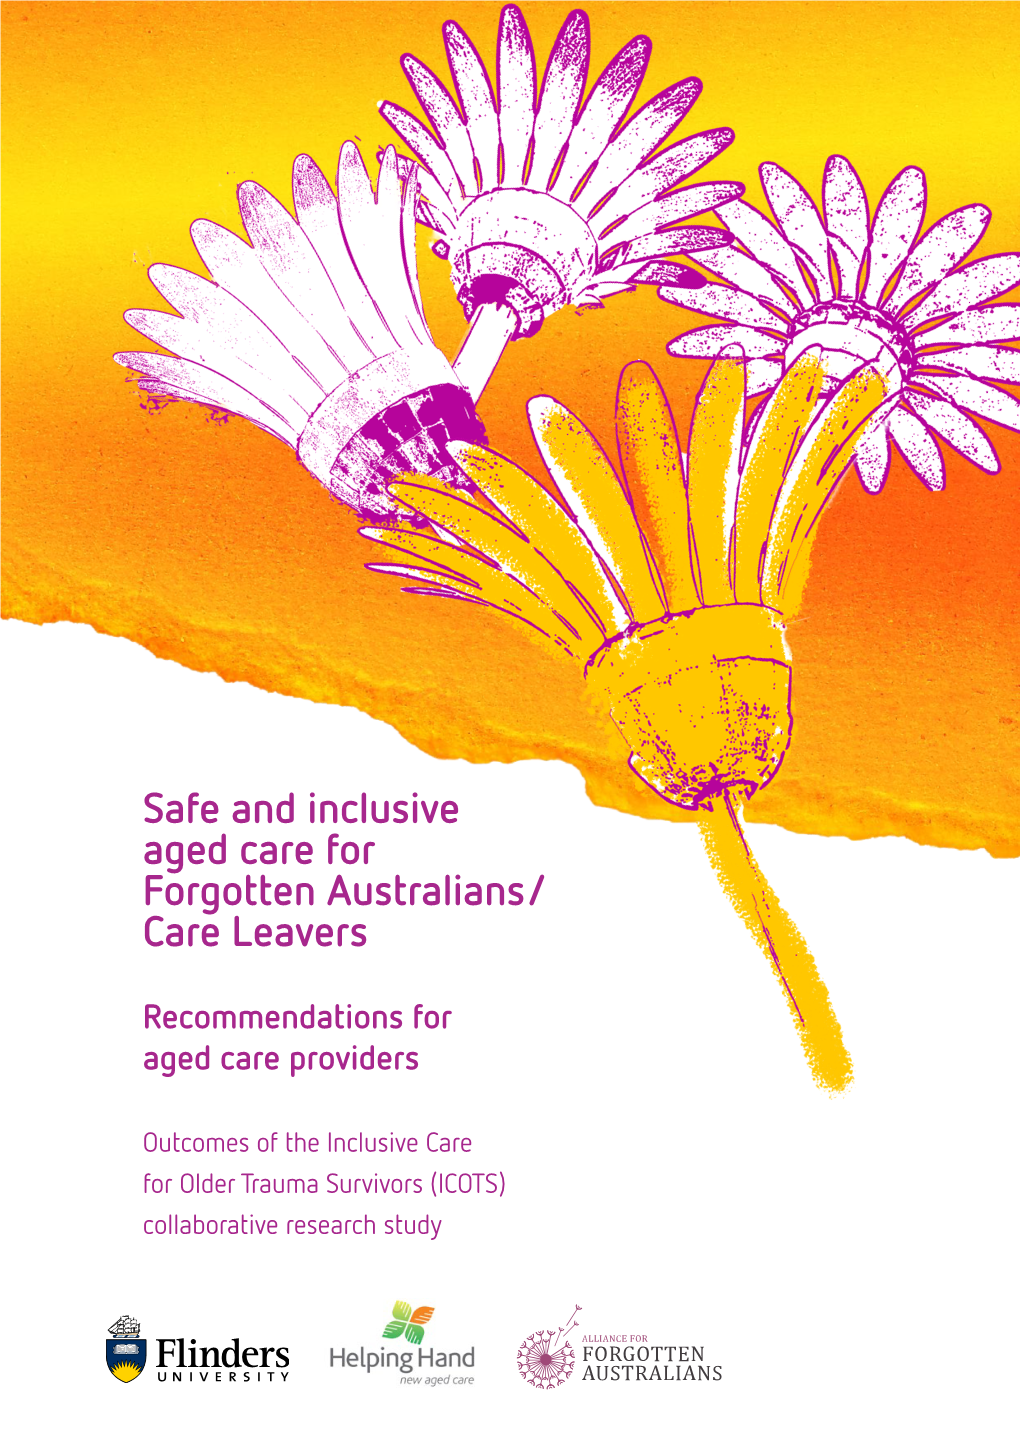 Safe and Inclusive Aged Care for Forgotten Australians / Care Leavers: Support Services for Recommendations for Aged Care Providers